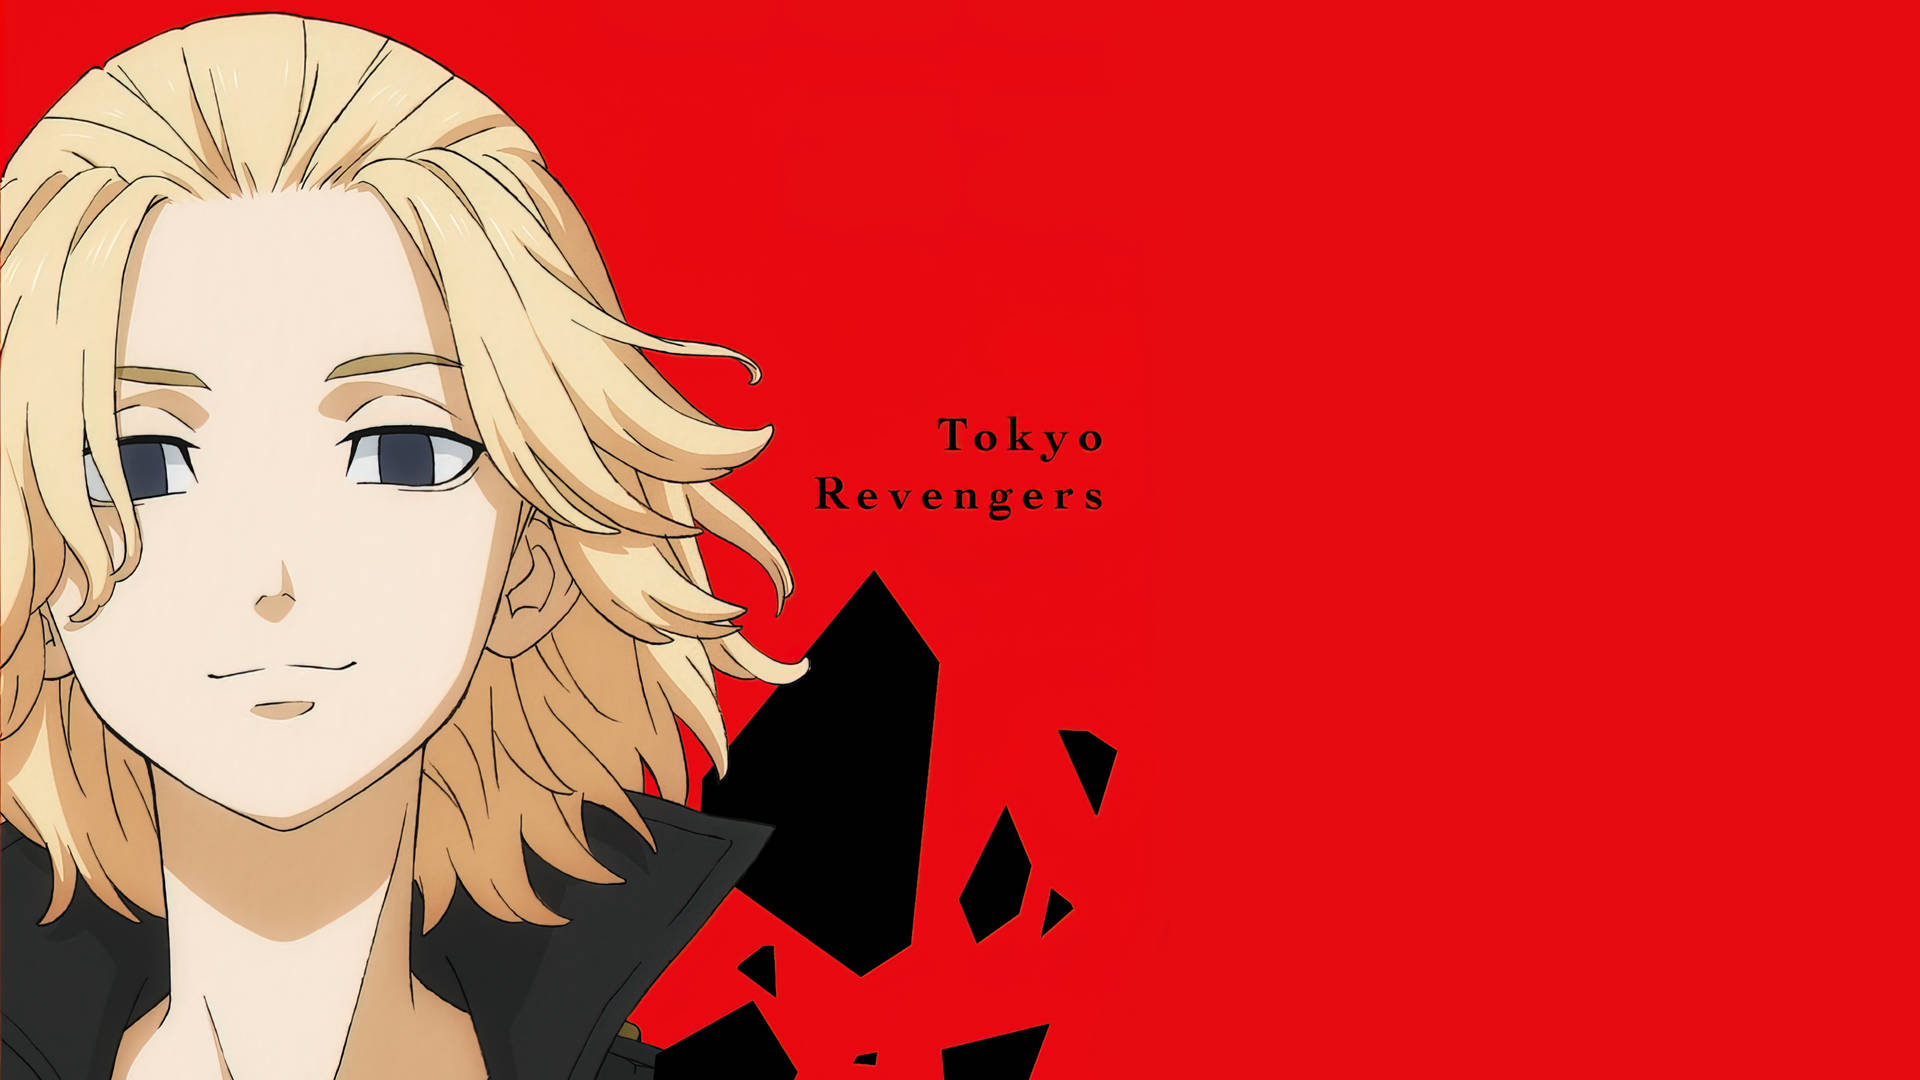 Mikey of Tokyo Revengers stands ready for battle in a red hoody. Wallpaper